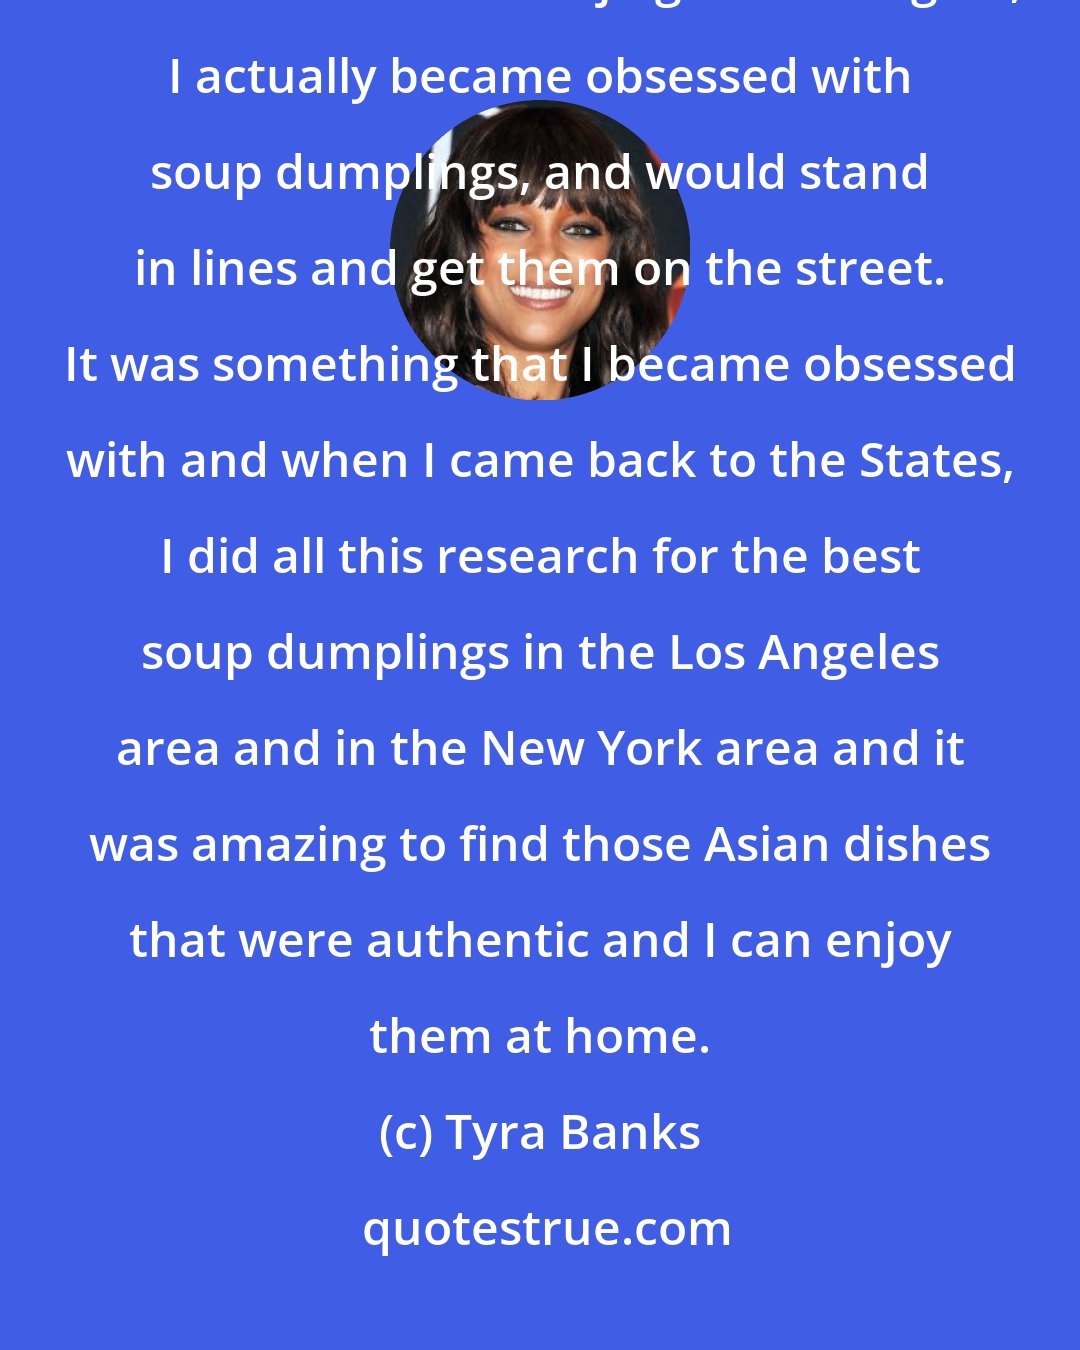 Tyra Banks: I really, really love China. To be honest, the food is so amazing! When I first went to Beijing and Shanghai, I actually became obsessed with soup dumplings, and would stand in lines and get them on the street. It was something that I became obsessed with and when I came back to the States, I did all this research for the best soup dumplings in the Los Angeles area and in the New York area and it was amazing to find those Asian dishes that were authentic and I can enjoy them at home.